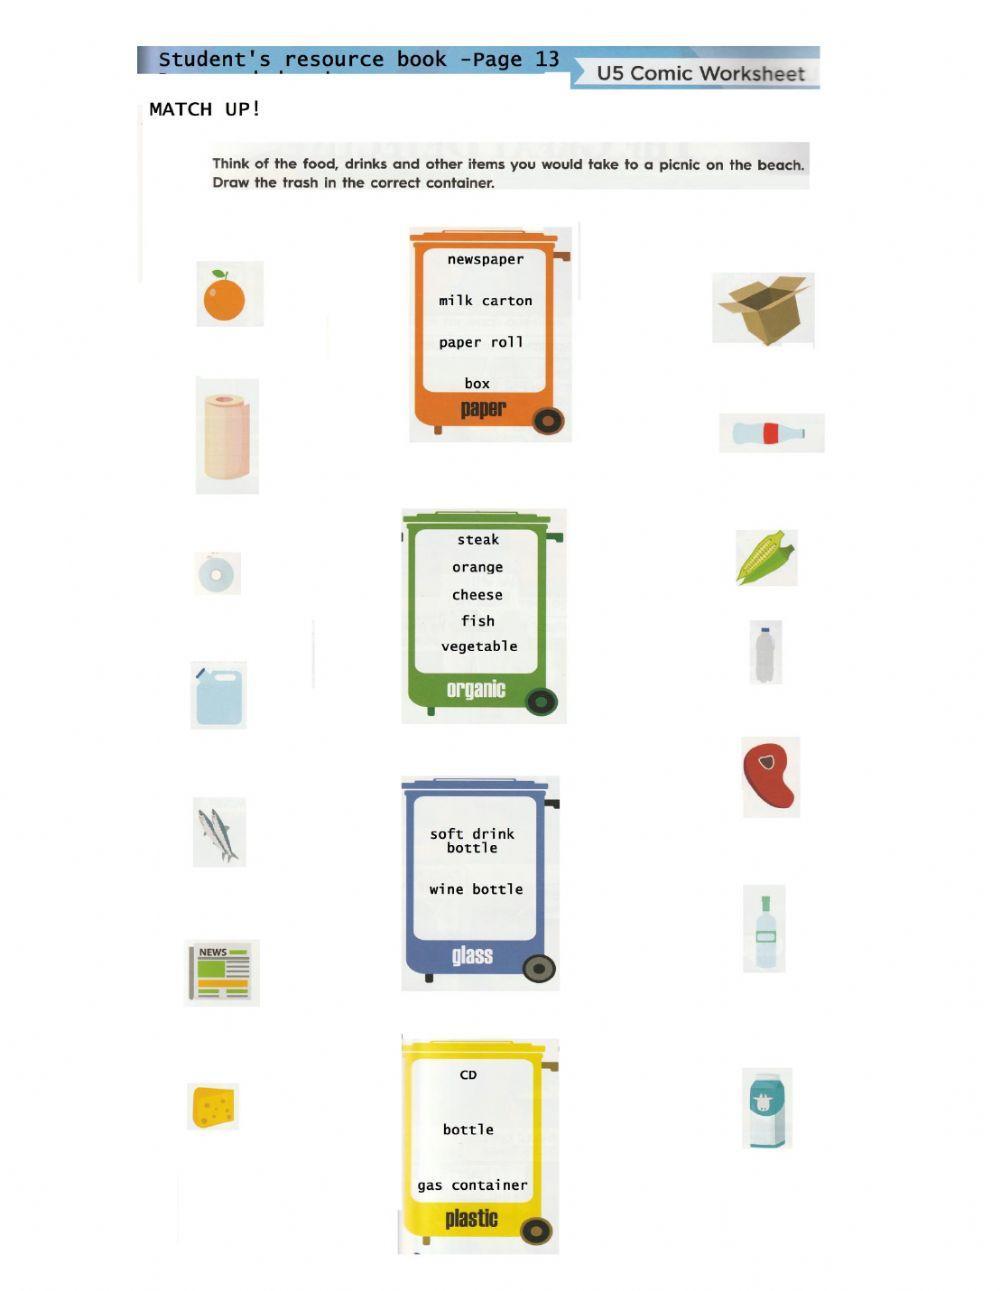 Classifying different types of waste